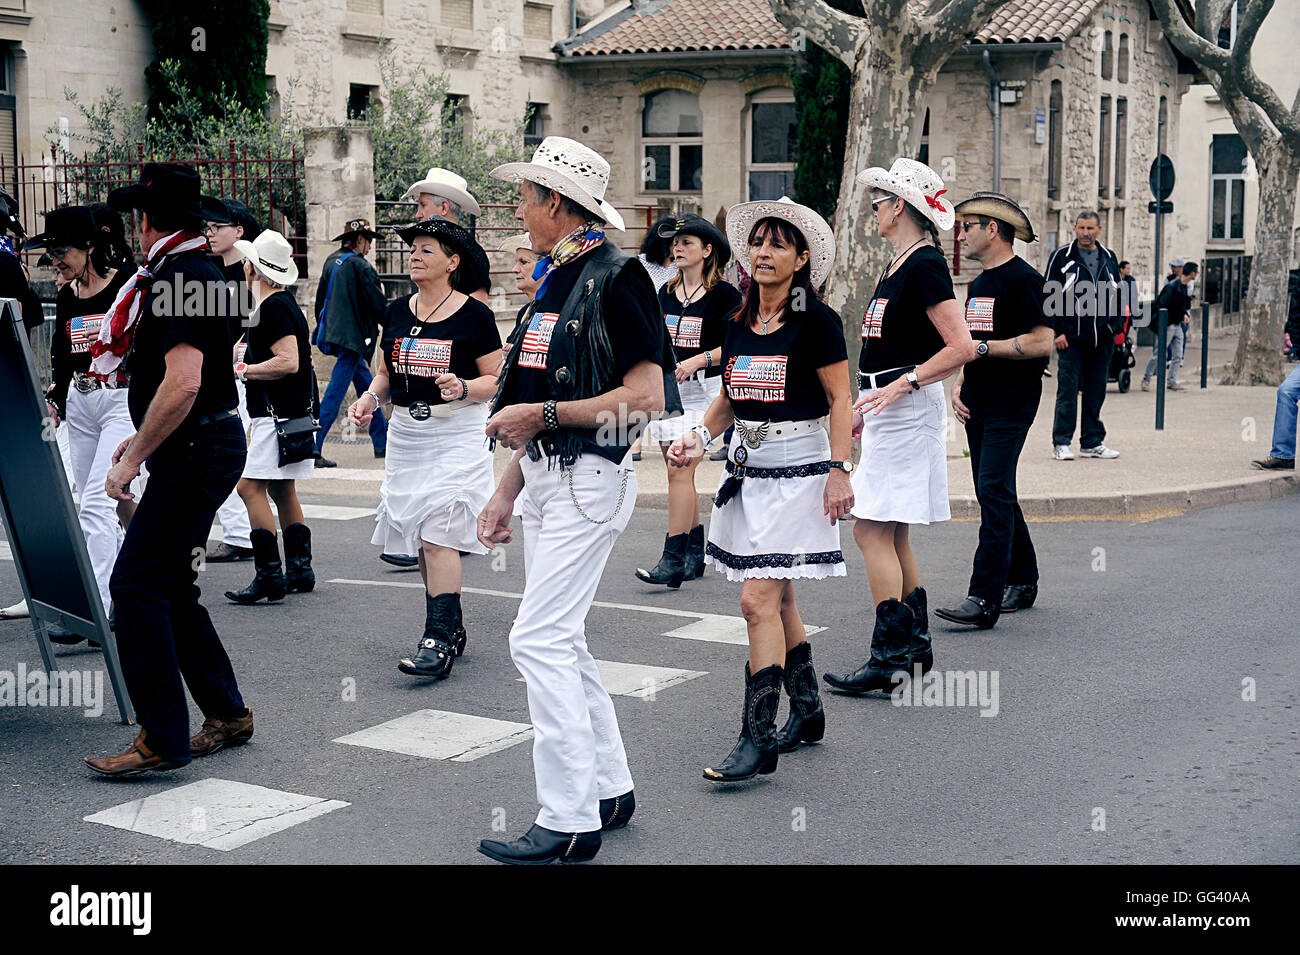 Country dancers in full demonstration in a gathering of American motorcycle in the town of Beaucaire Stock Photo